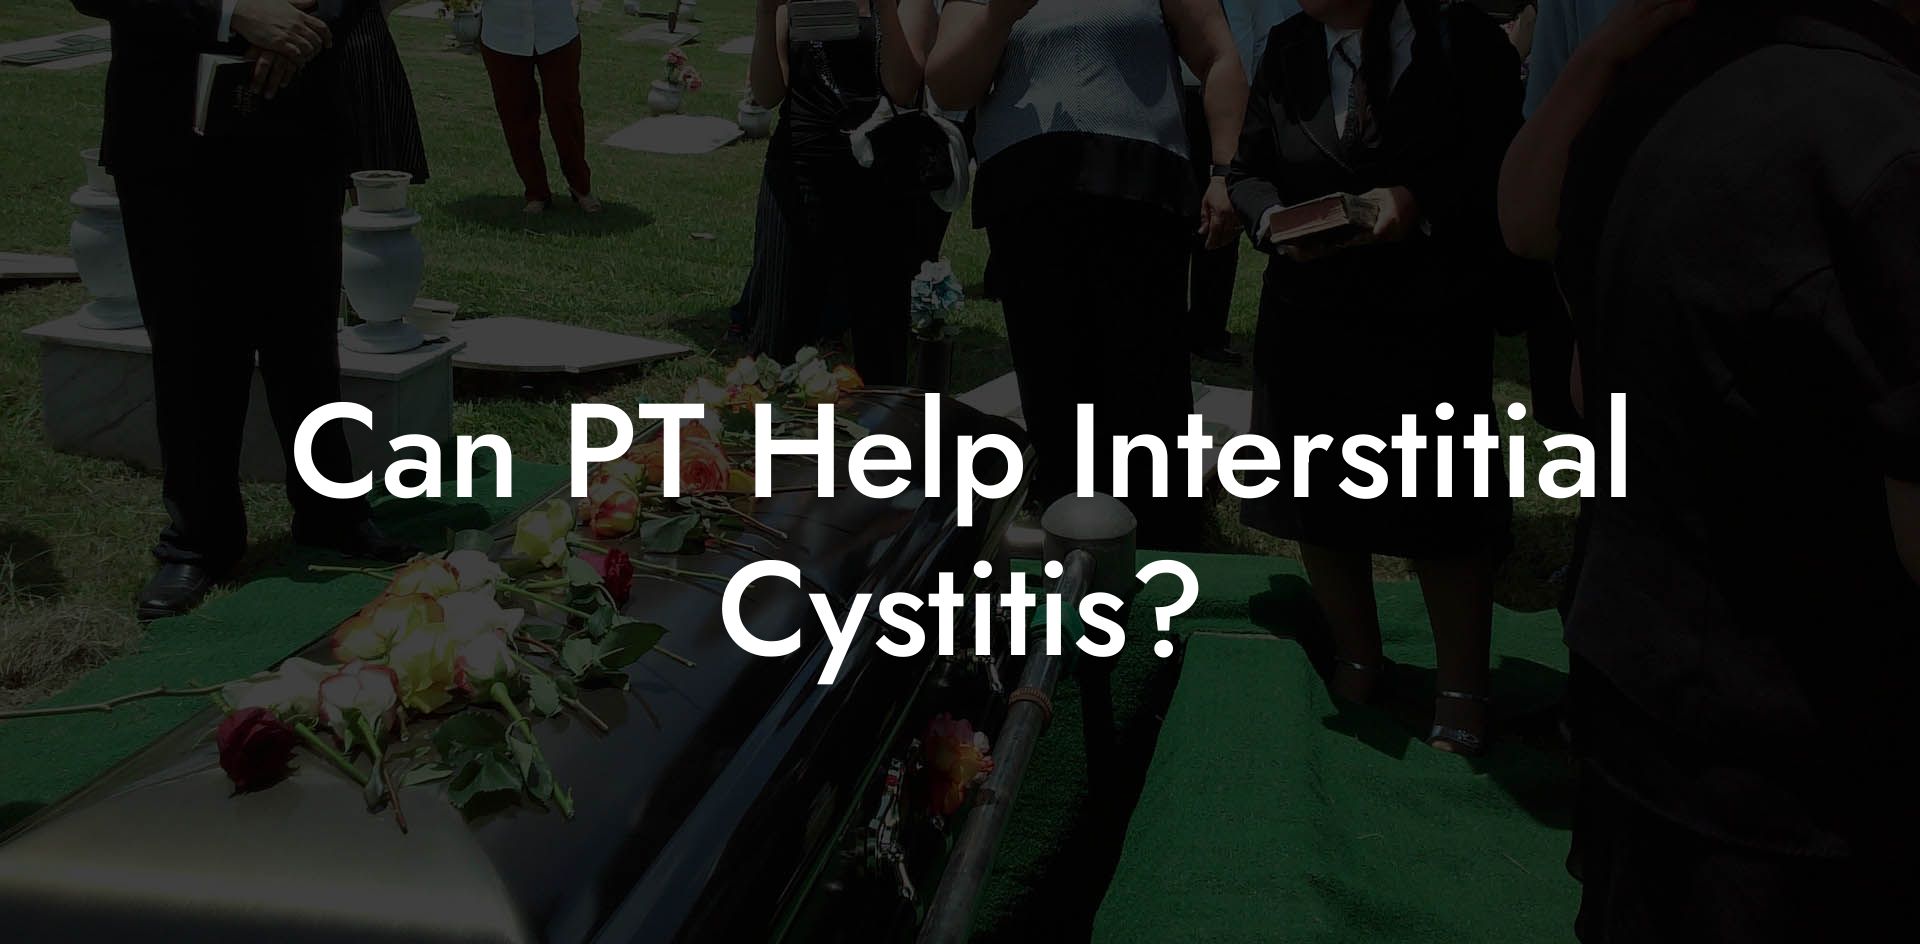 Can PT Help Interstitial Cystitis?